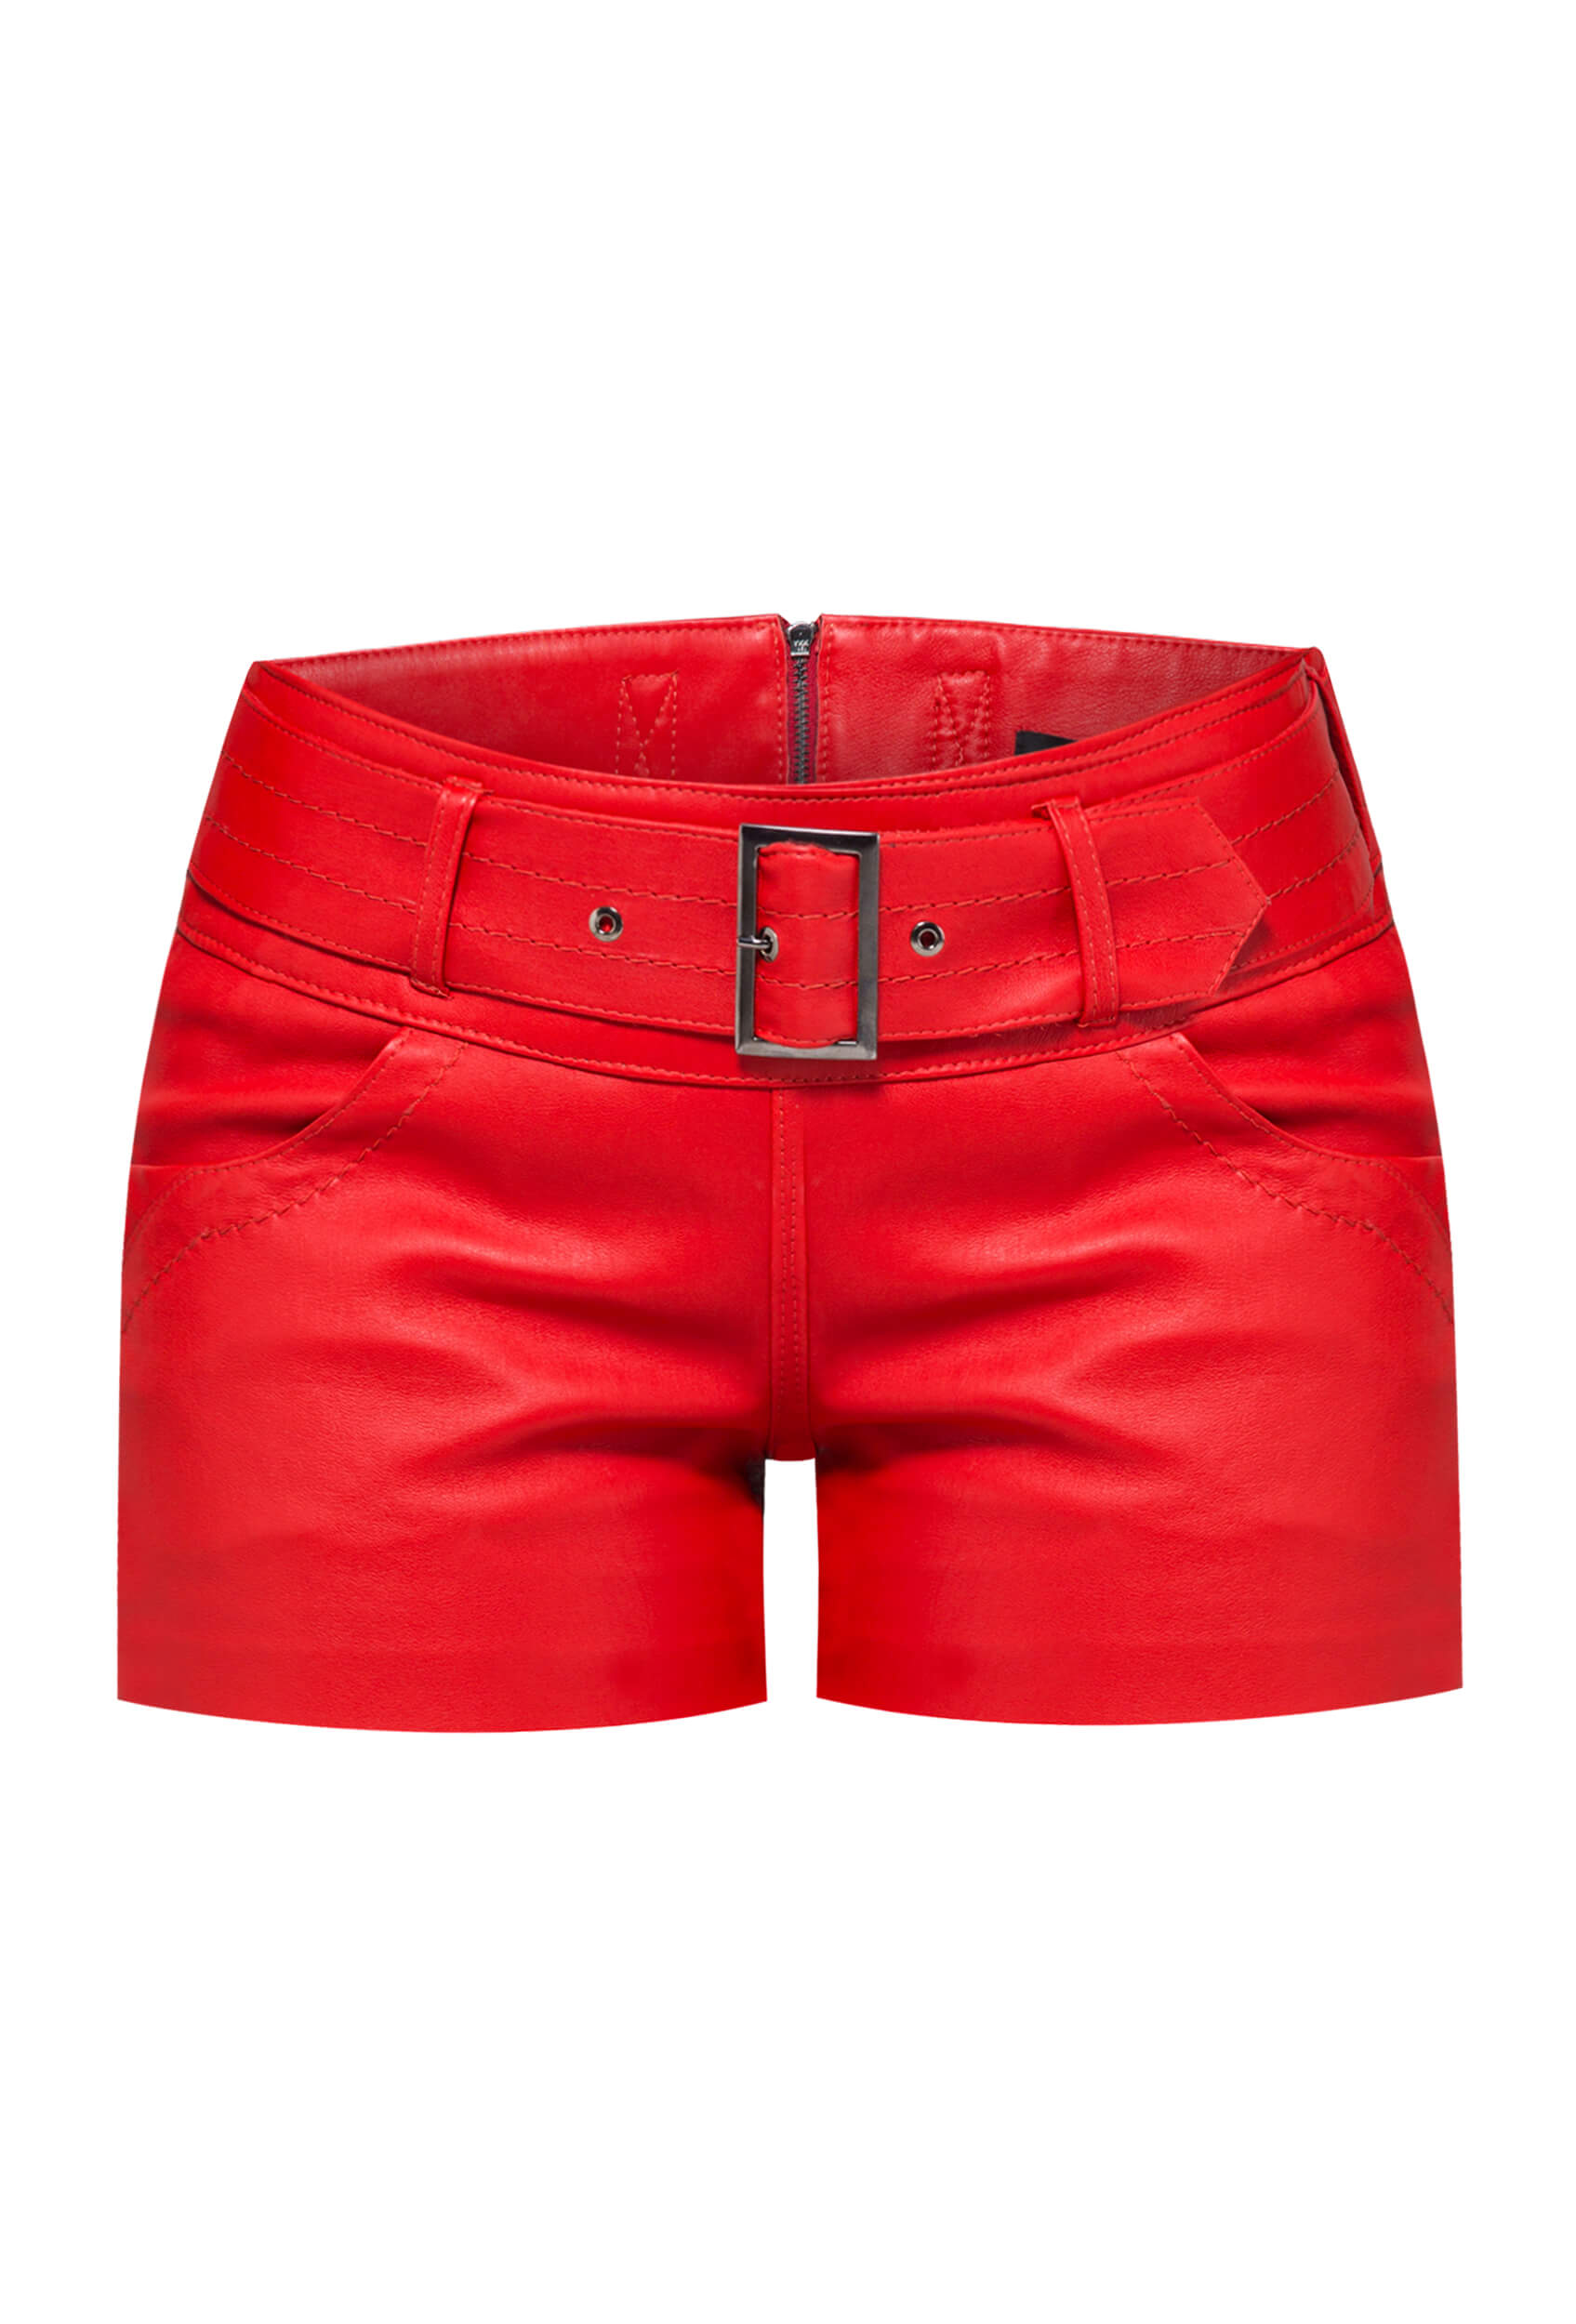 women's leather shorts, red leather shorts, red natural leather shorts, premium Italian leather shorts, must have shorts for shapely legs, Italian leather shorts, slim fit leather shorts, Polish designer women's shorts